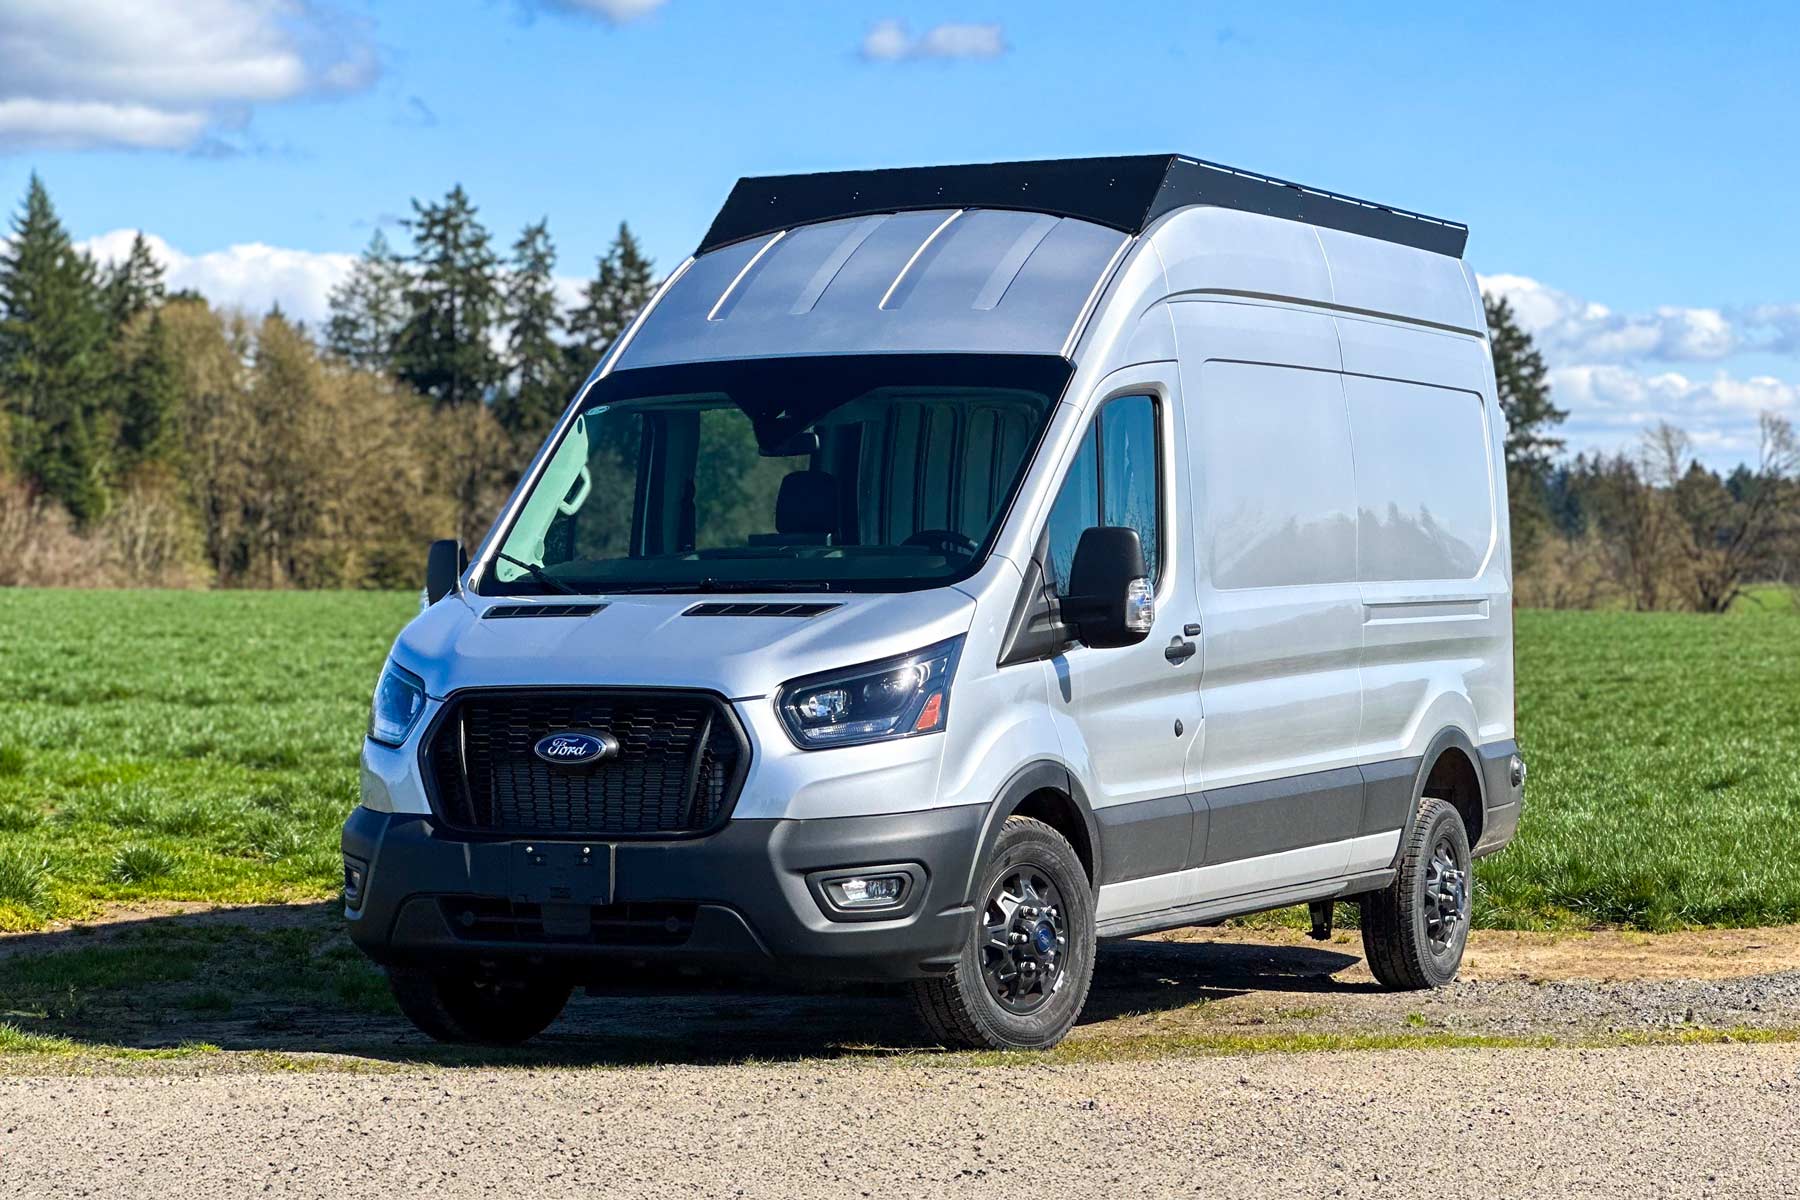 Ford Transit with Stealth+ Roof Rack installed, showcasing sleek design and perfect fit.